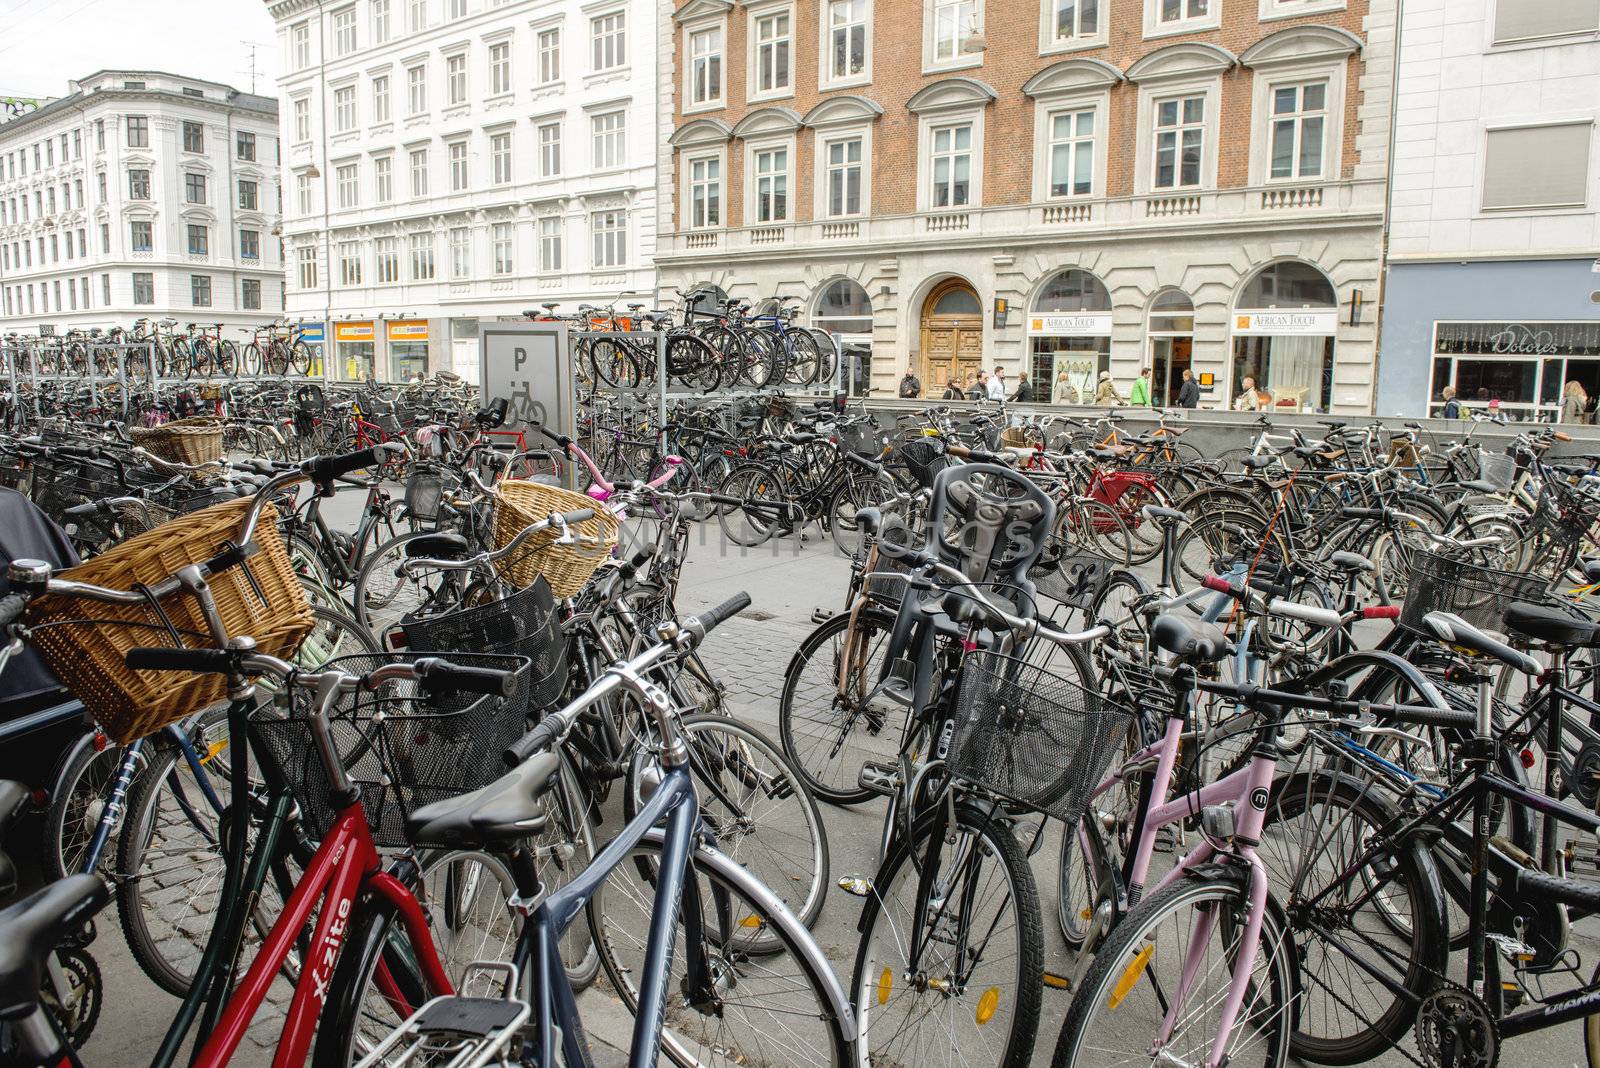 Bycicles in Copenhagen by Alenmax